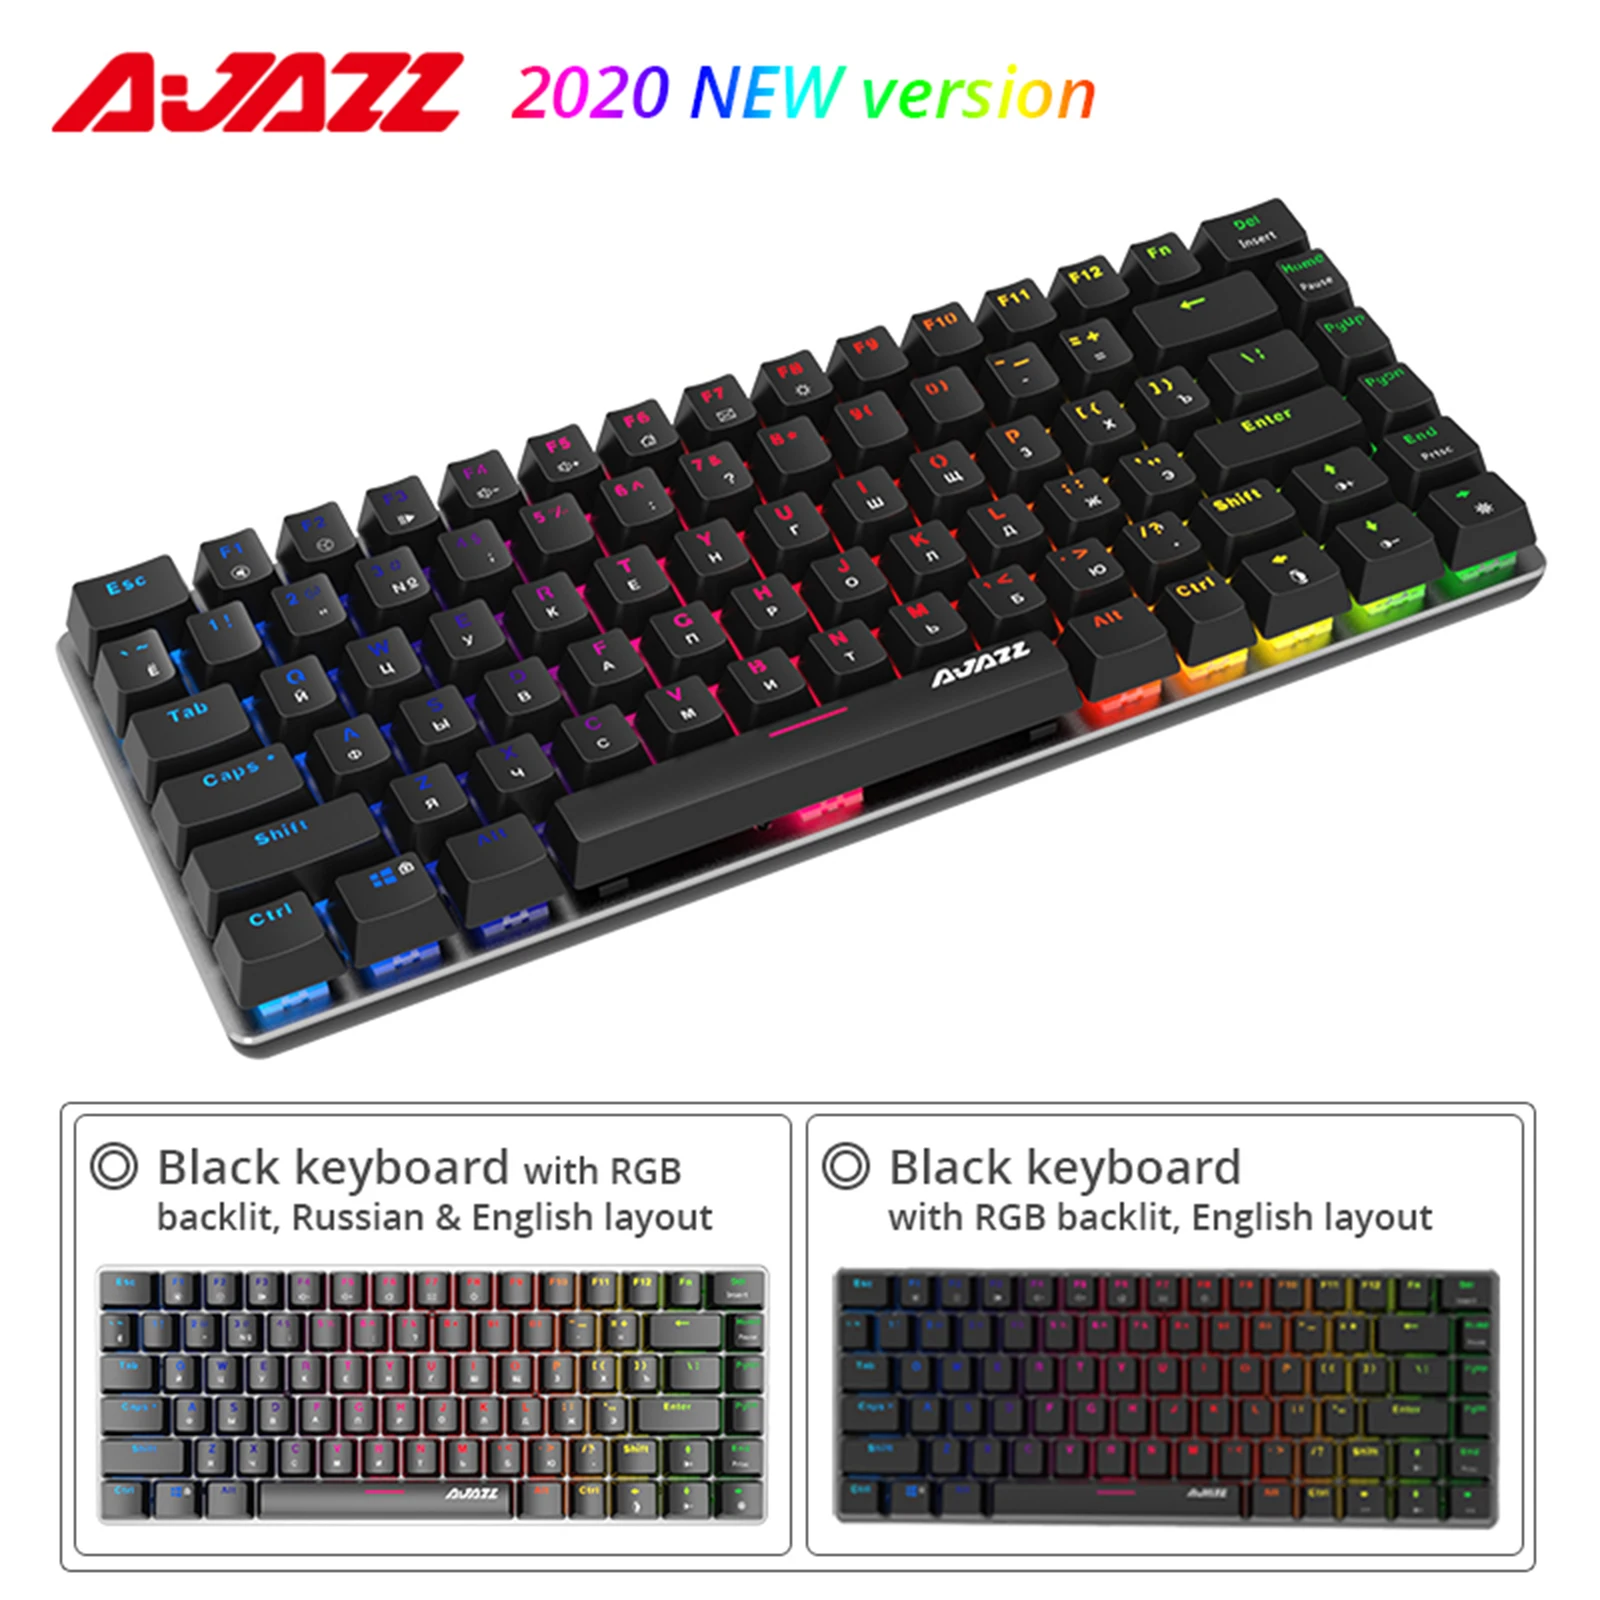 82 Keys Wired Mechanical Keyboard, RGB Backlit, for PC Laptop Gaming Office, Compact Fashion Portable Russian Layout